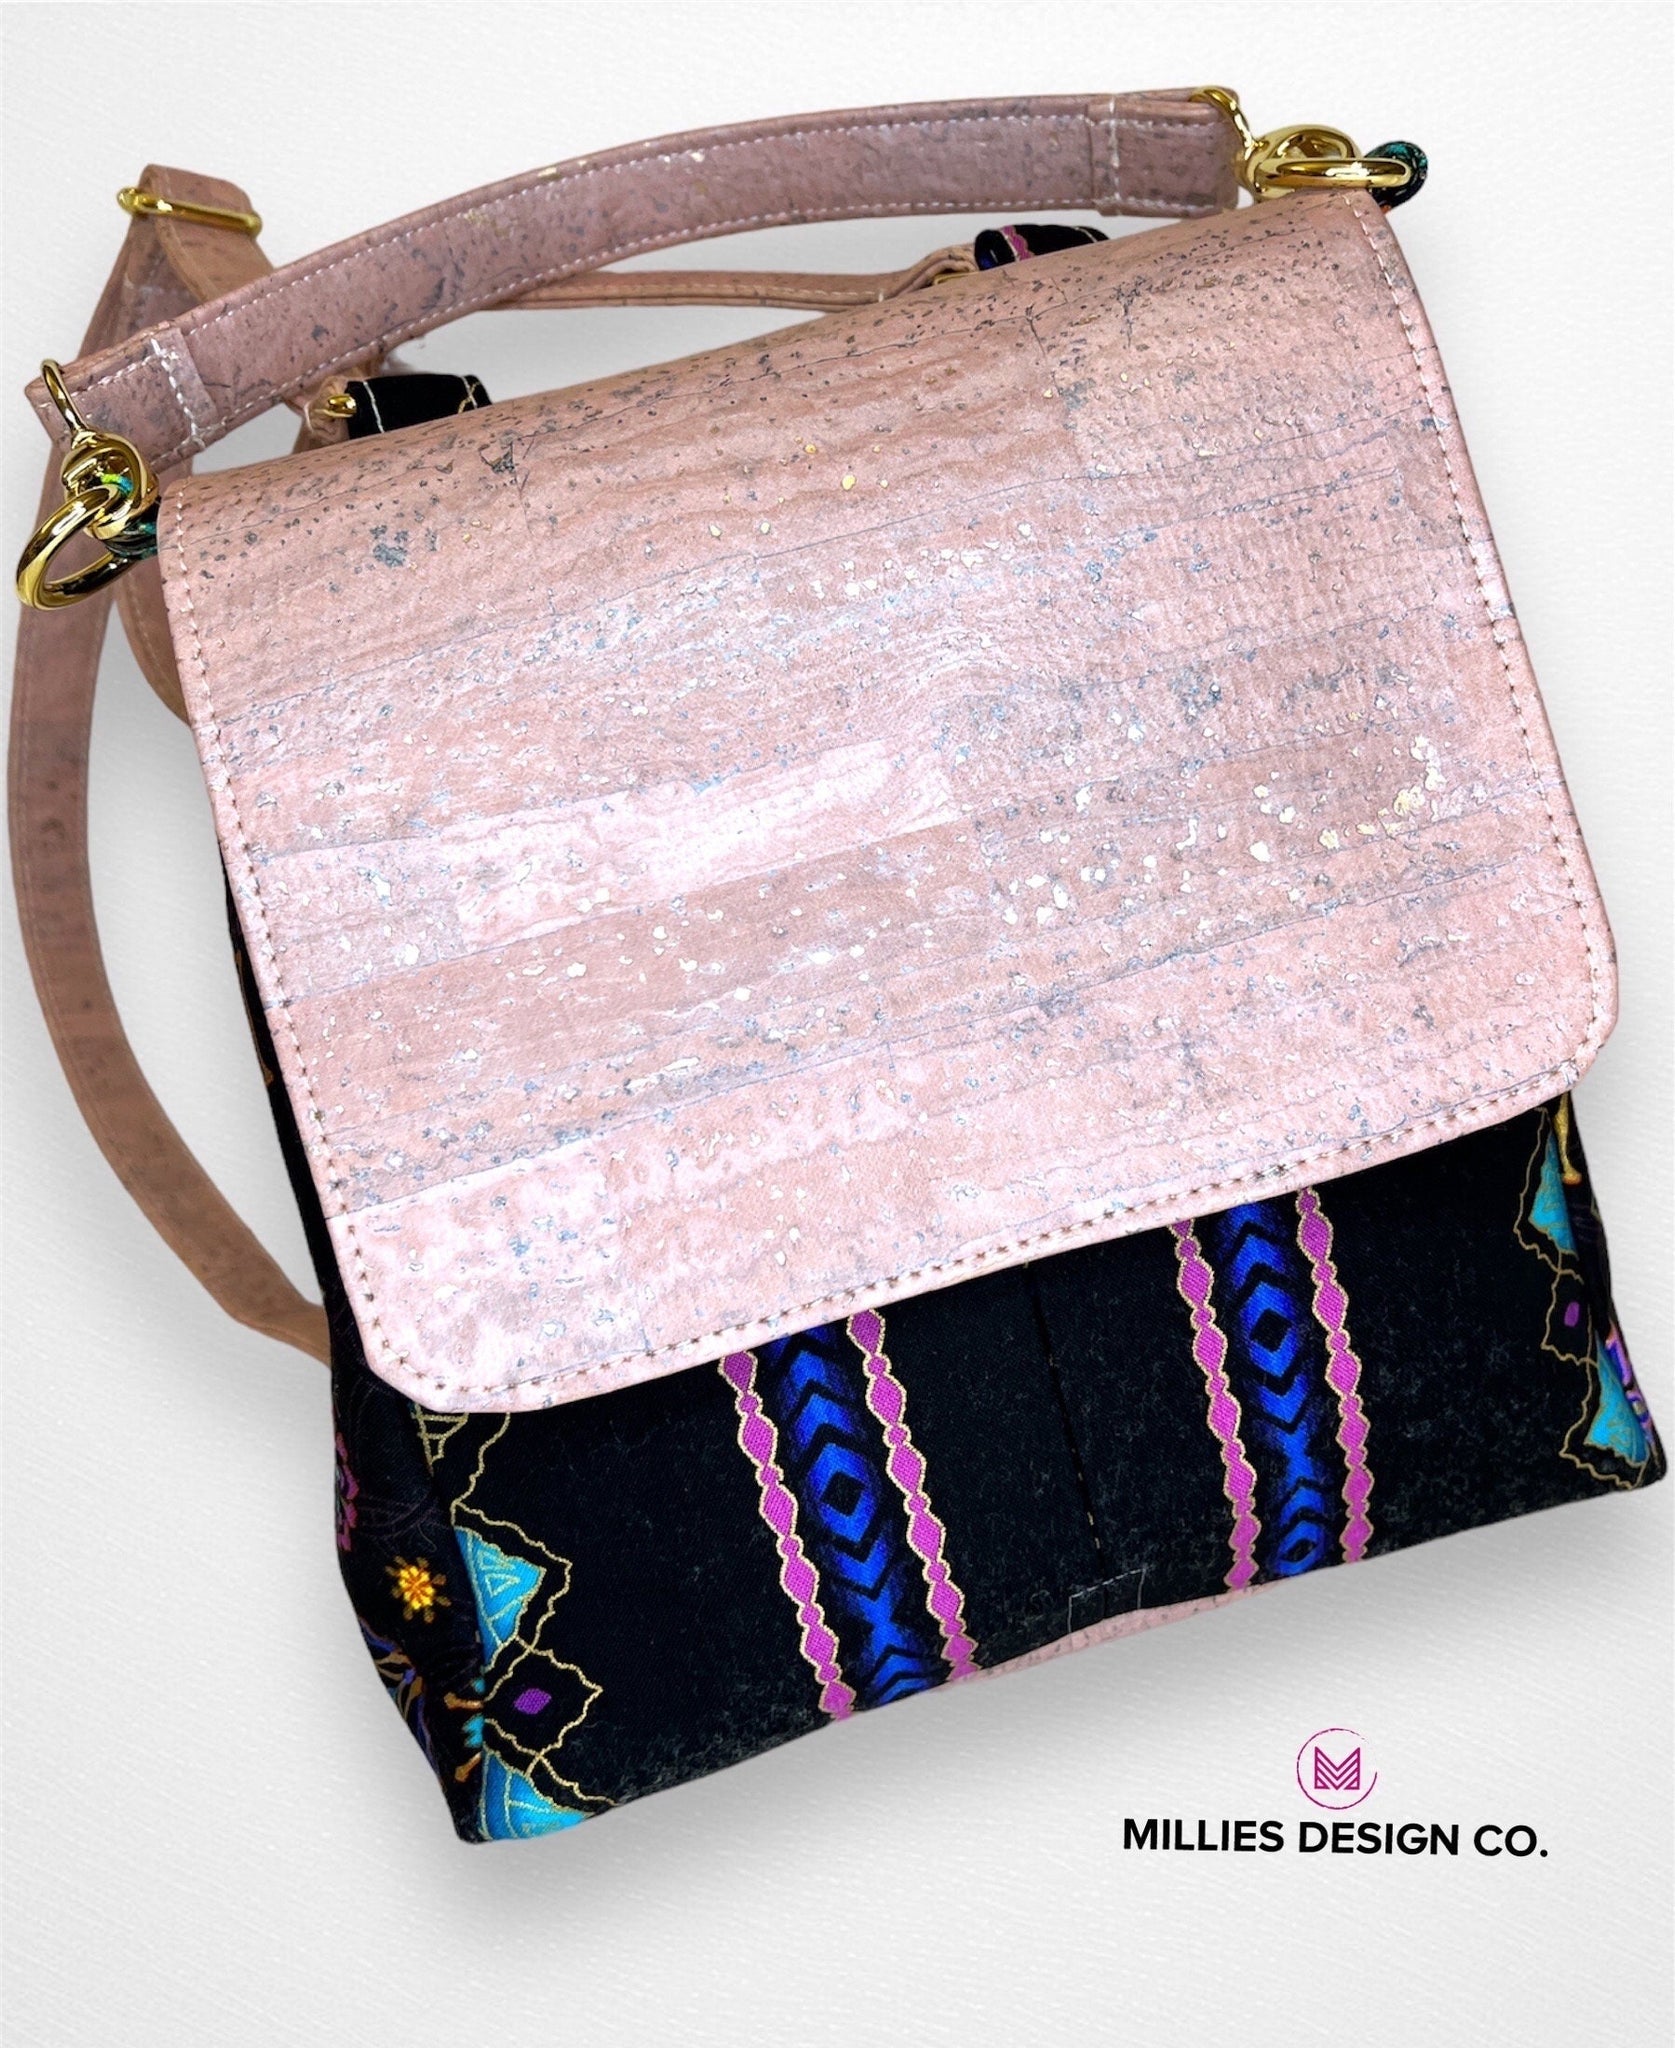 Cork/Cotton Backpack - Shimmer Pink Cork with Coordinating Metallic Cotton Fabric